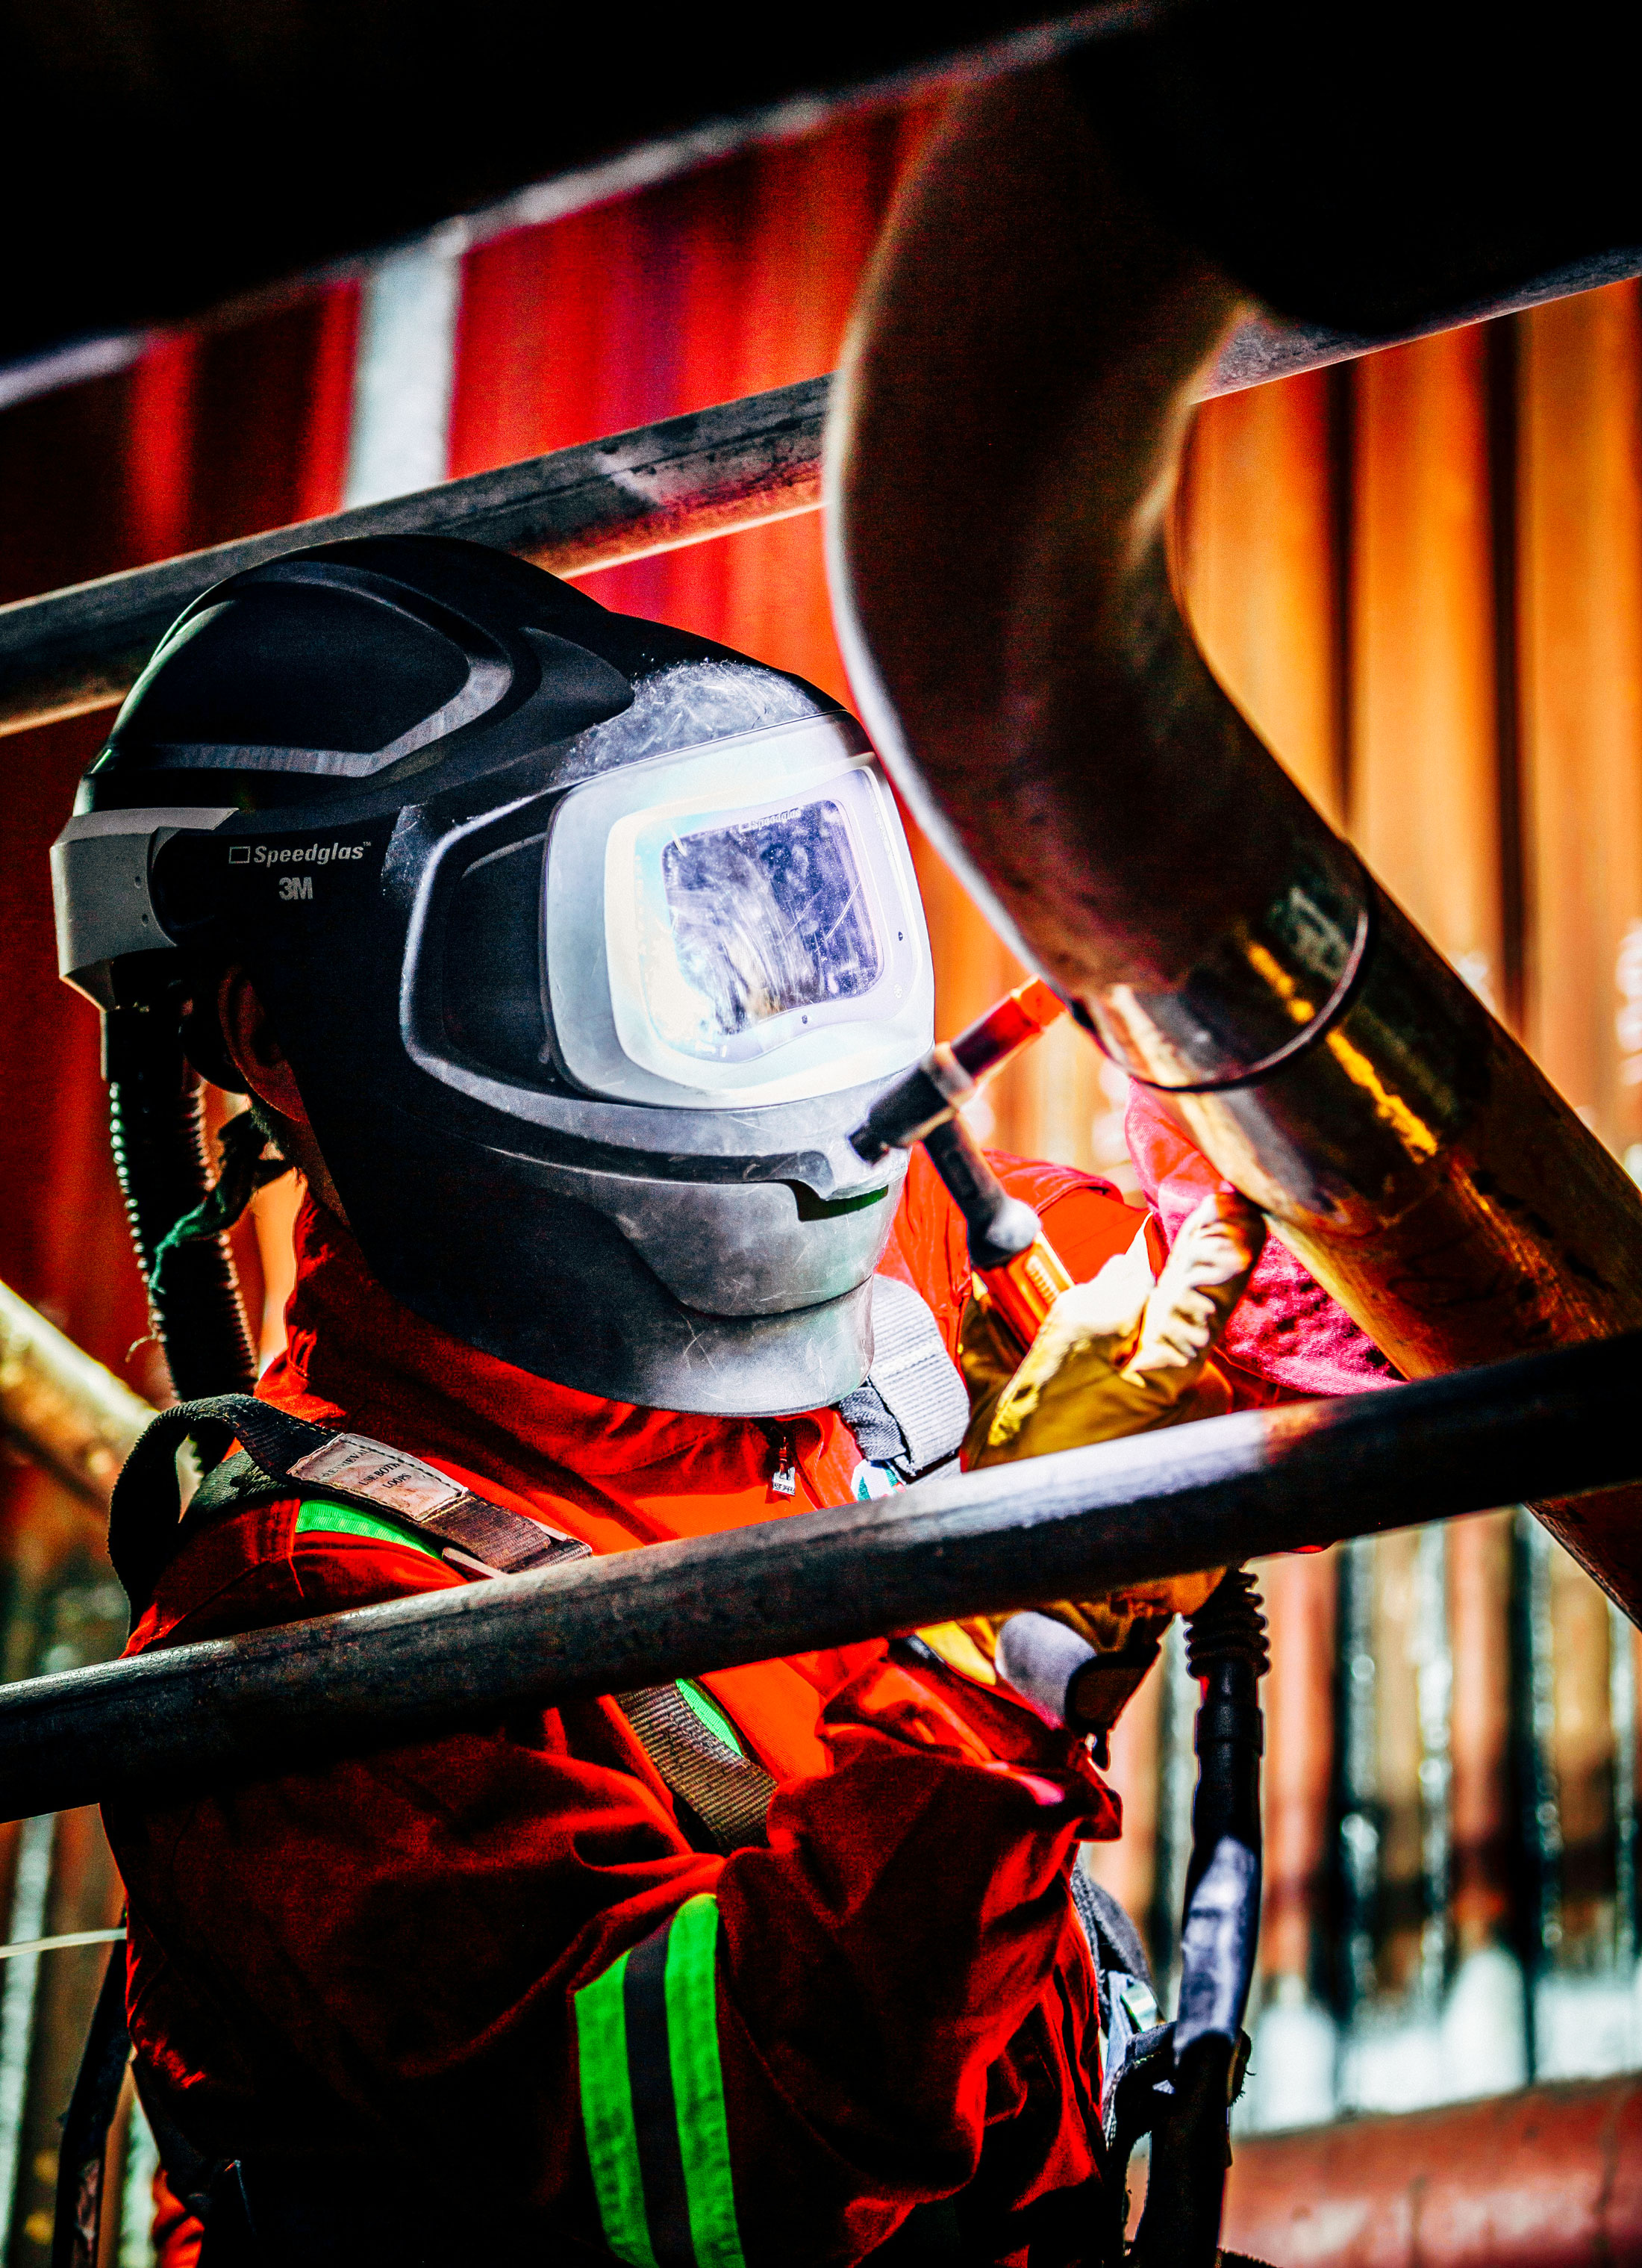 A technician welding person, fixing metal steel pipes. Wearing a safety hood and mask, set in an industrial factory.